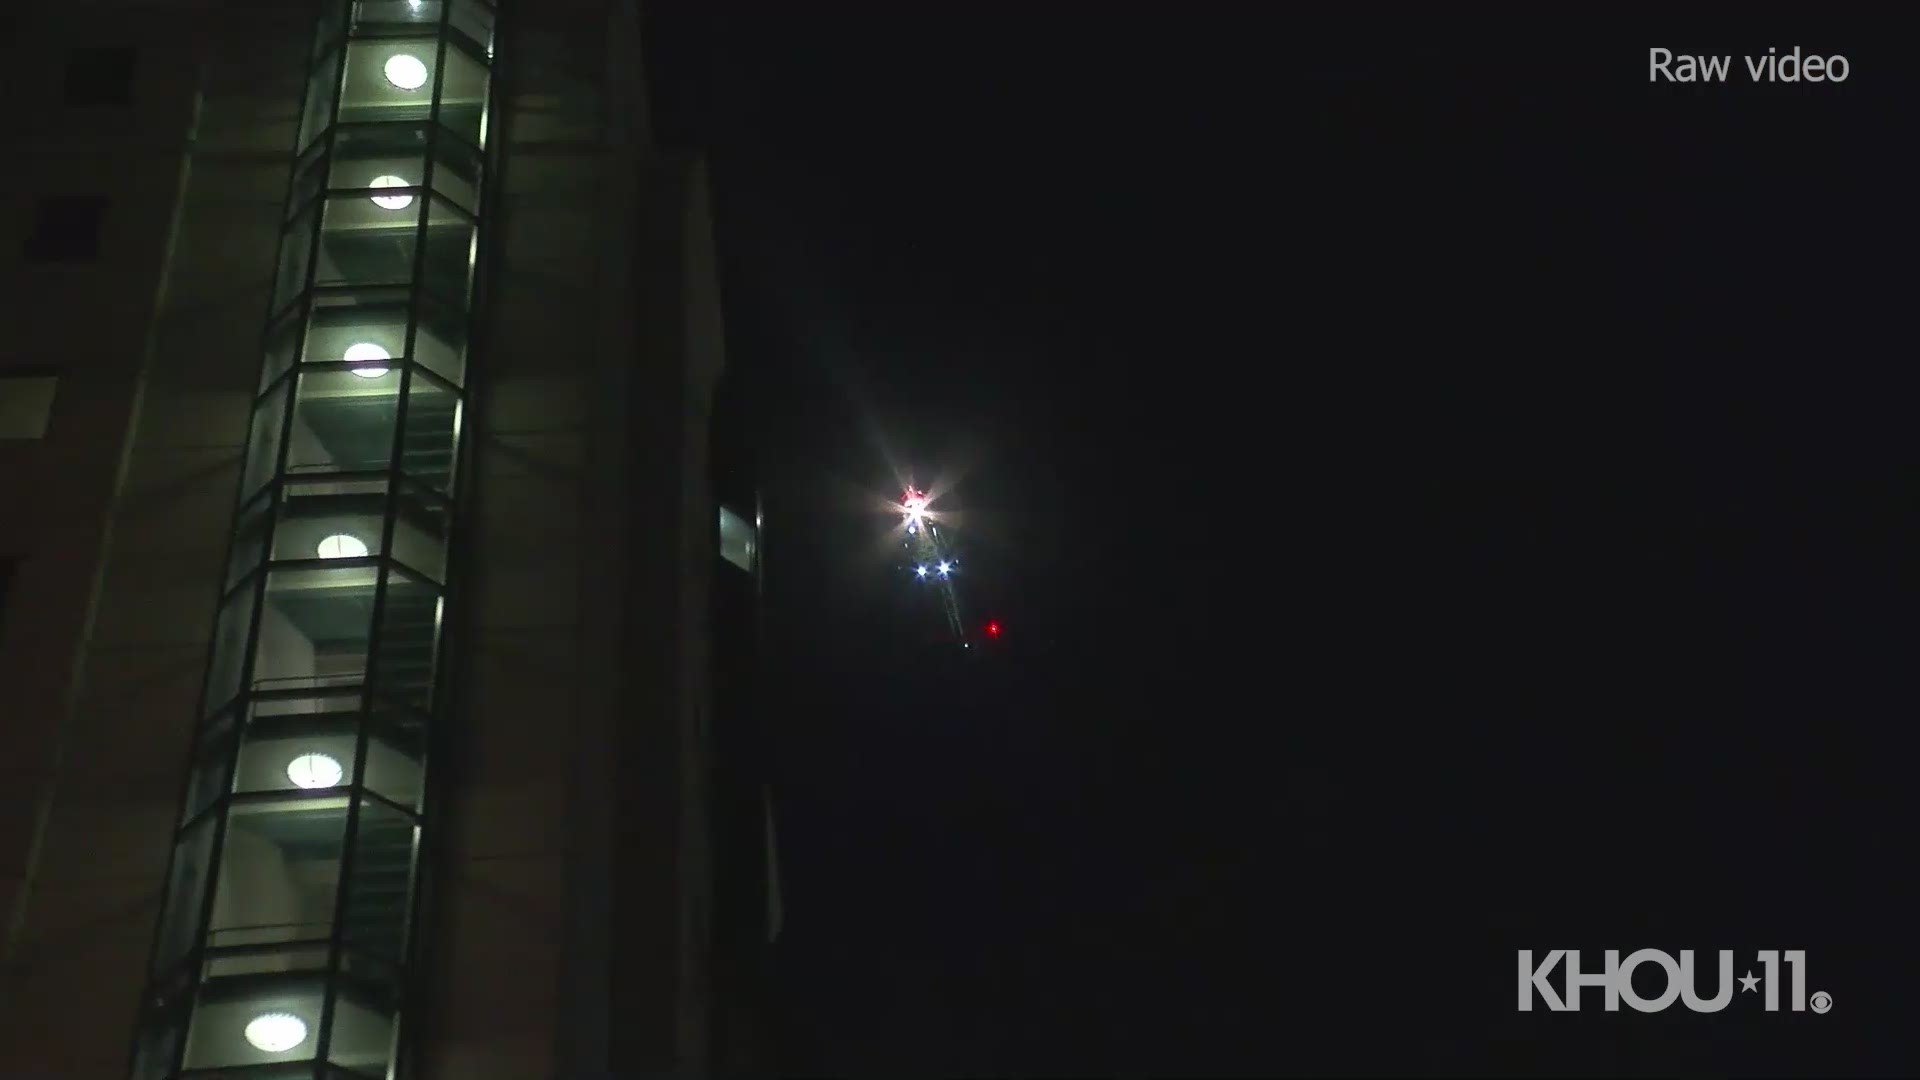 Houston police say a shooting victim was airlifted to the hospital late Monday. Investigators believe the shooting started as a fight at a nearby basketball game.